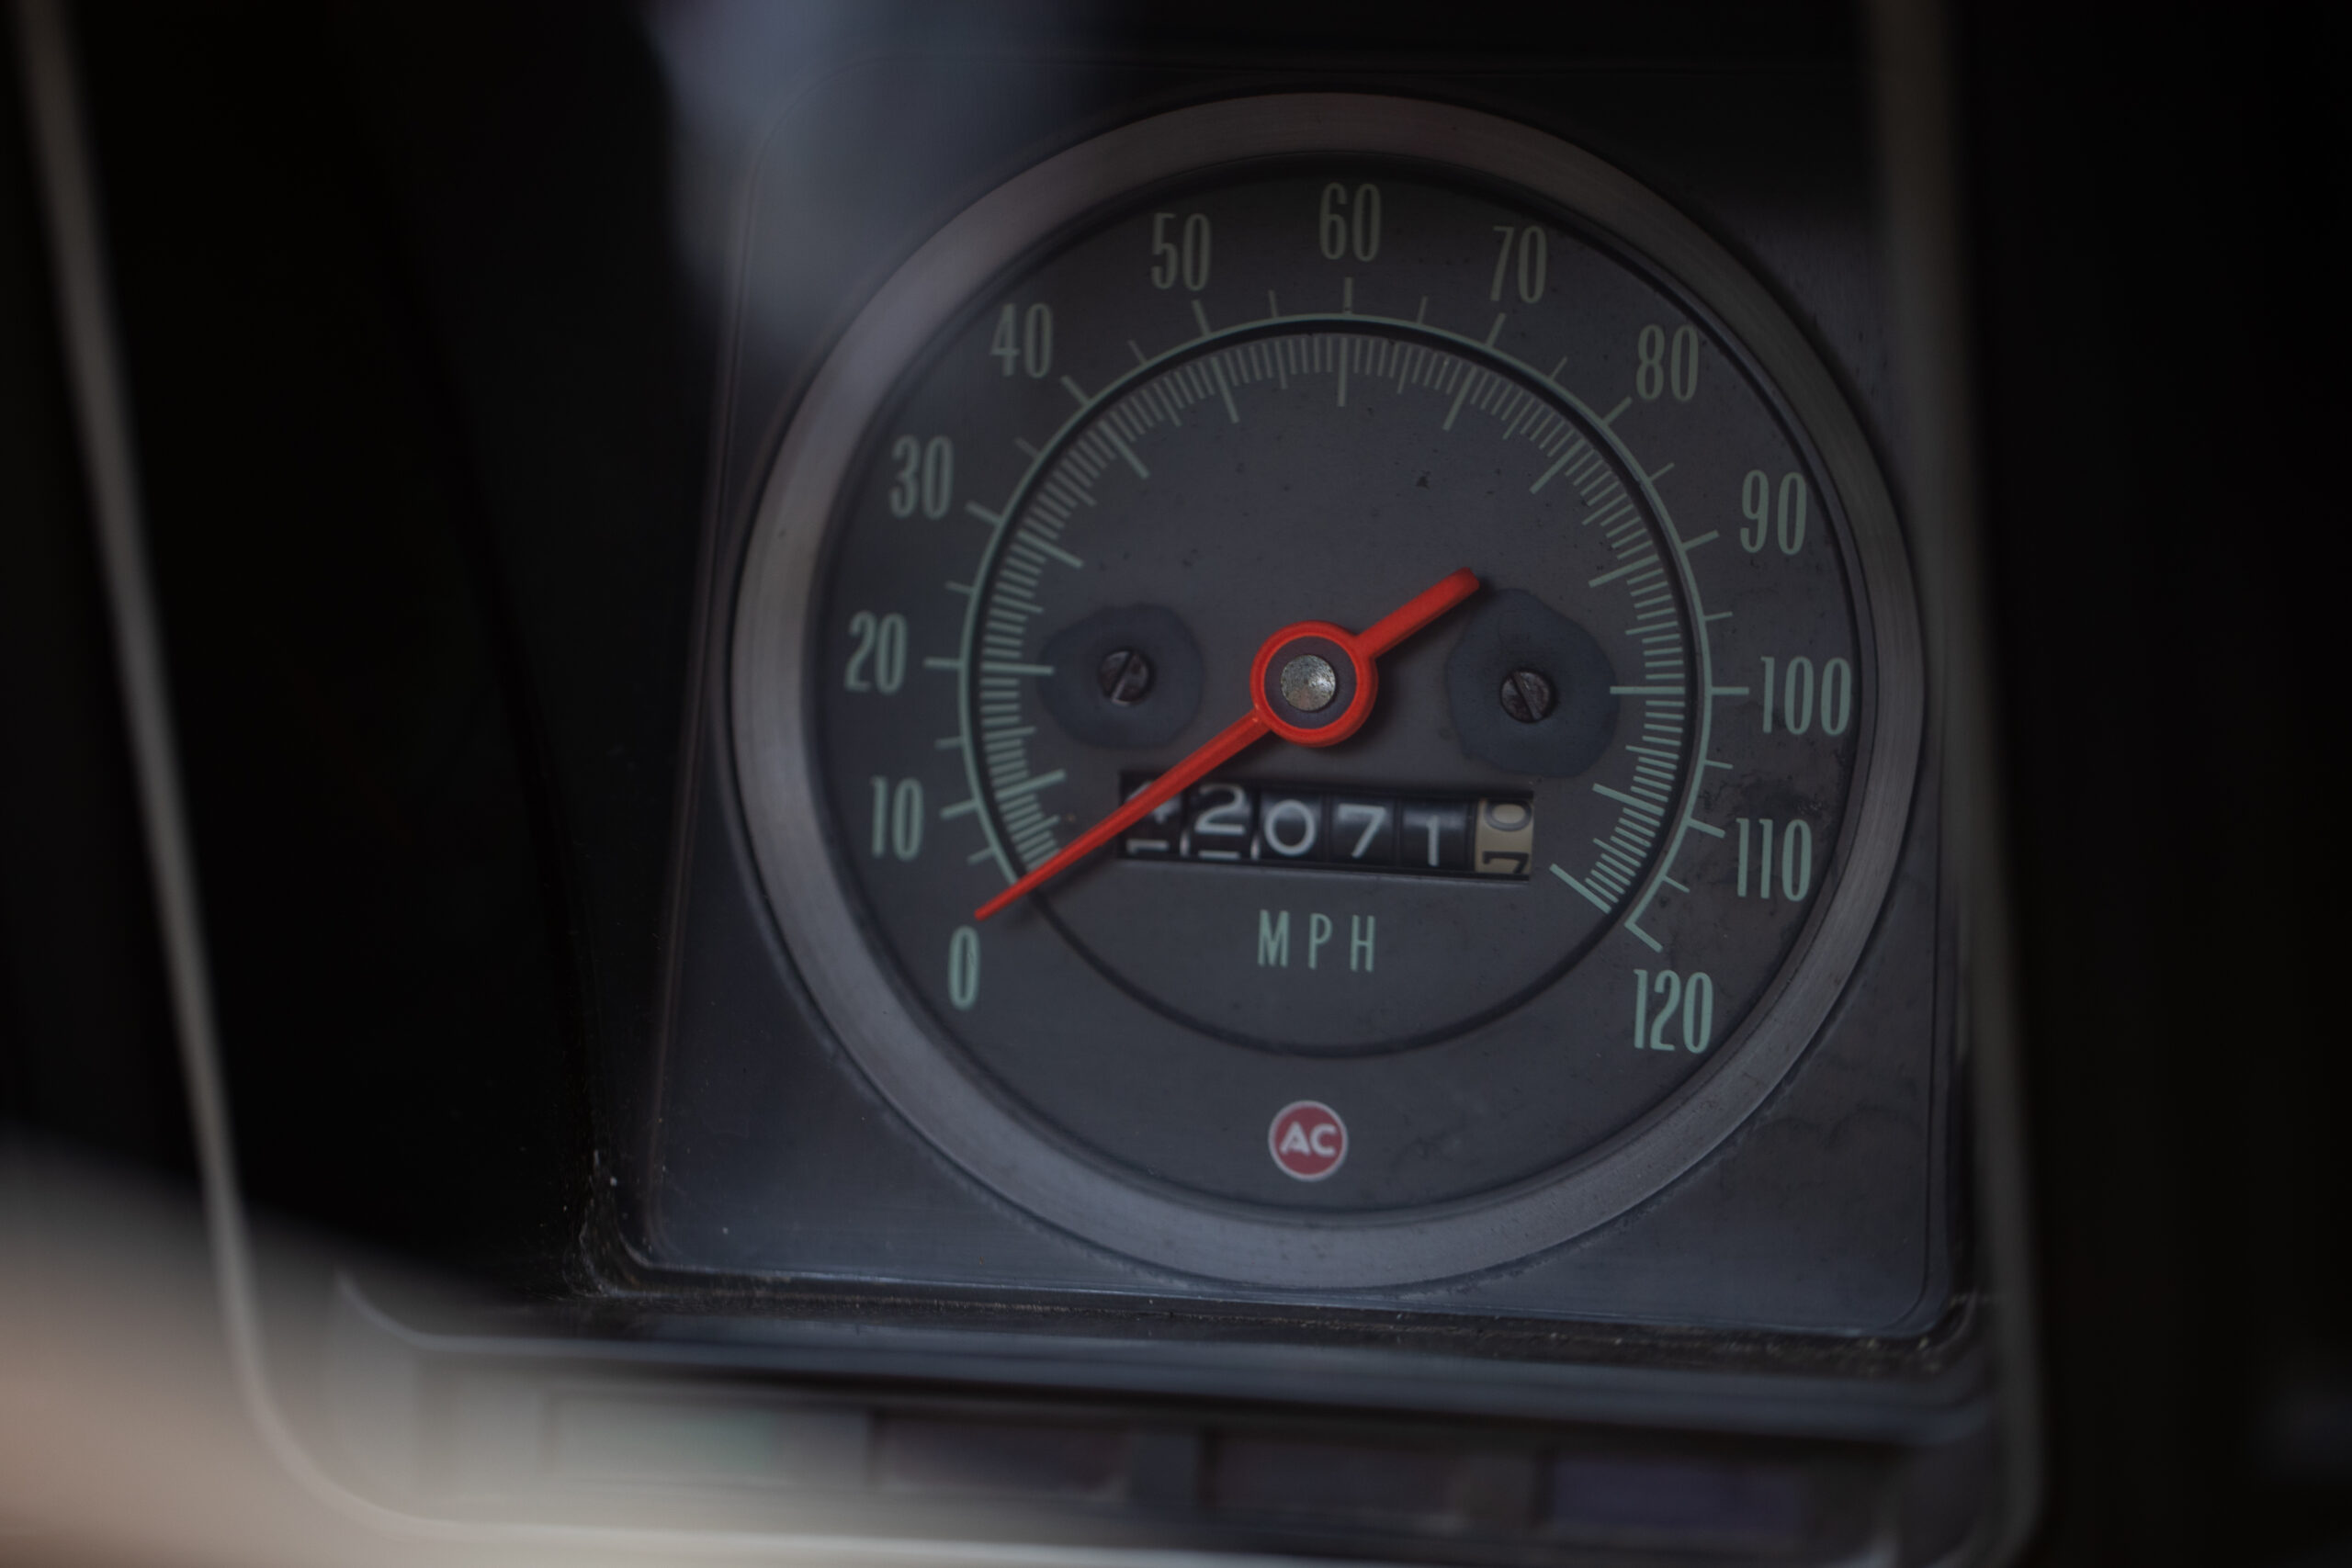 Close-up image of a car's analog speedometer showing a speed of 0 mph with an odometer reading of 12077 miles.